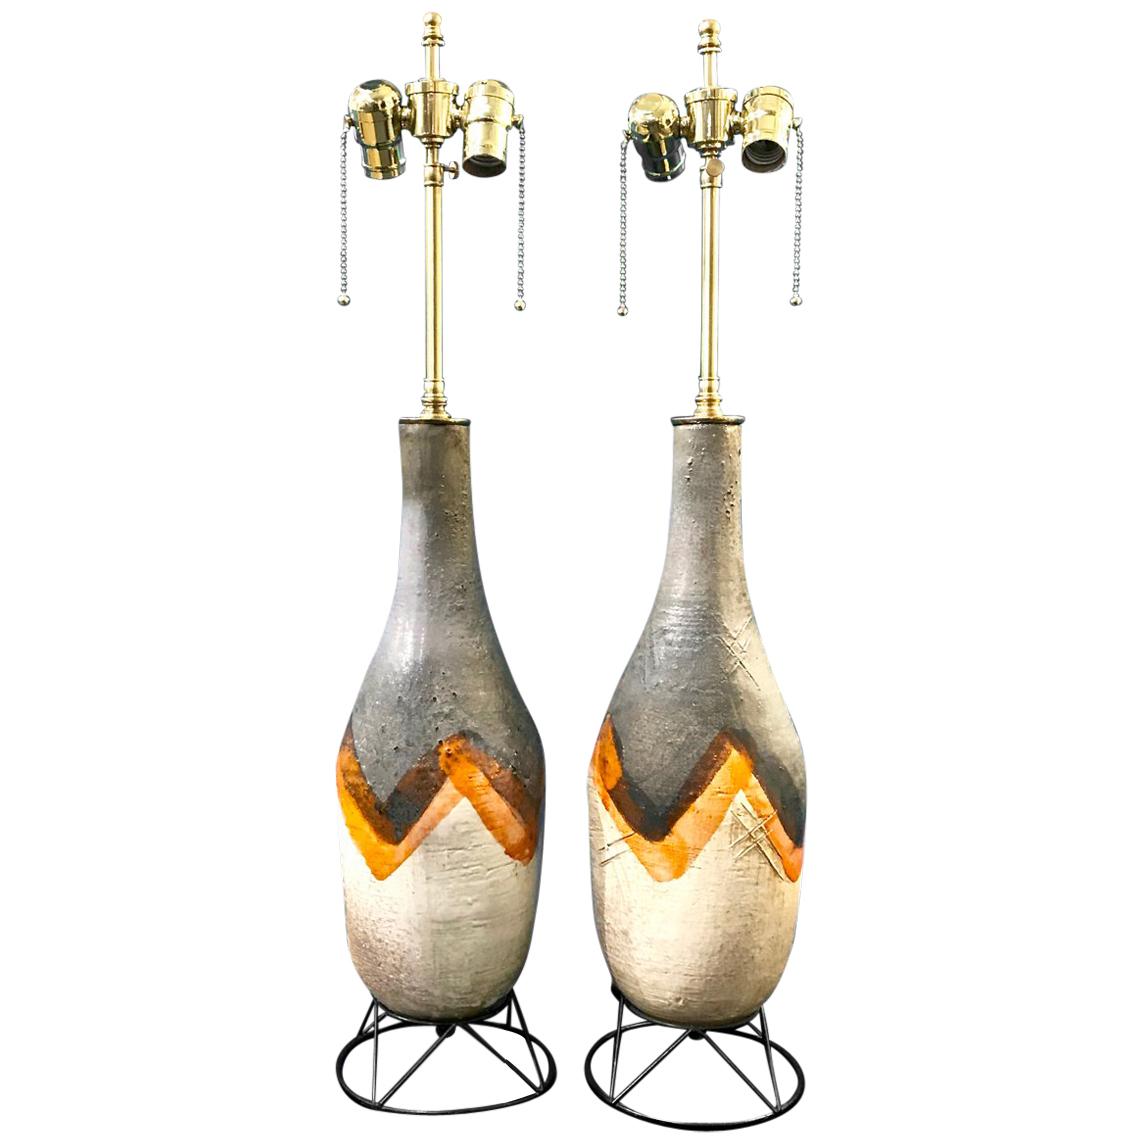 Pair of Midcentury Glazed Terra Cotta Lamps on Wire Plinths